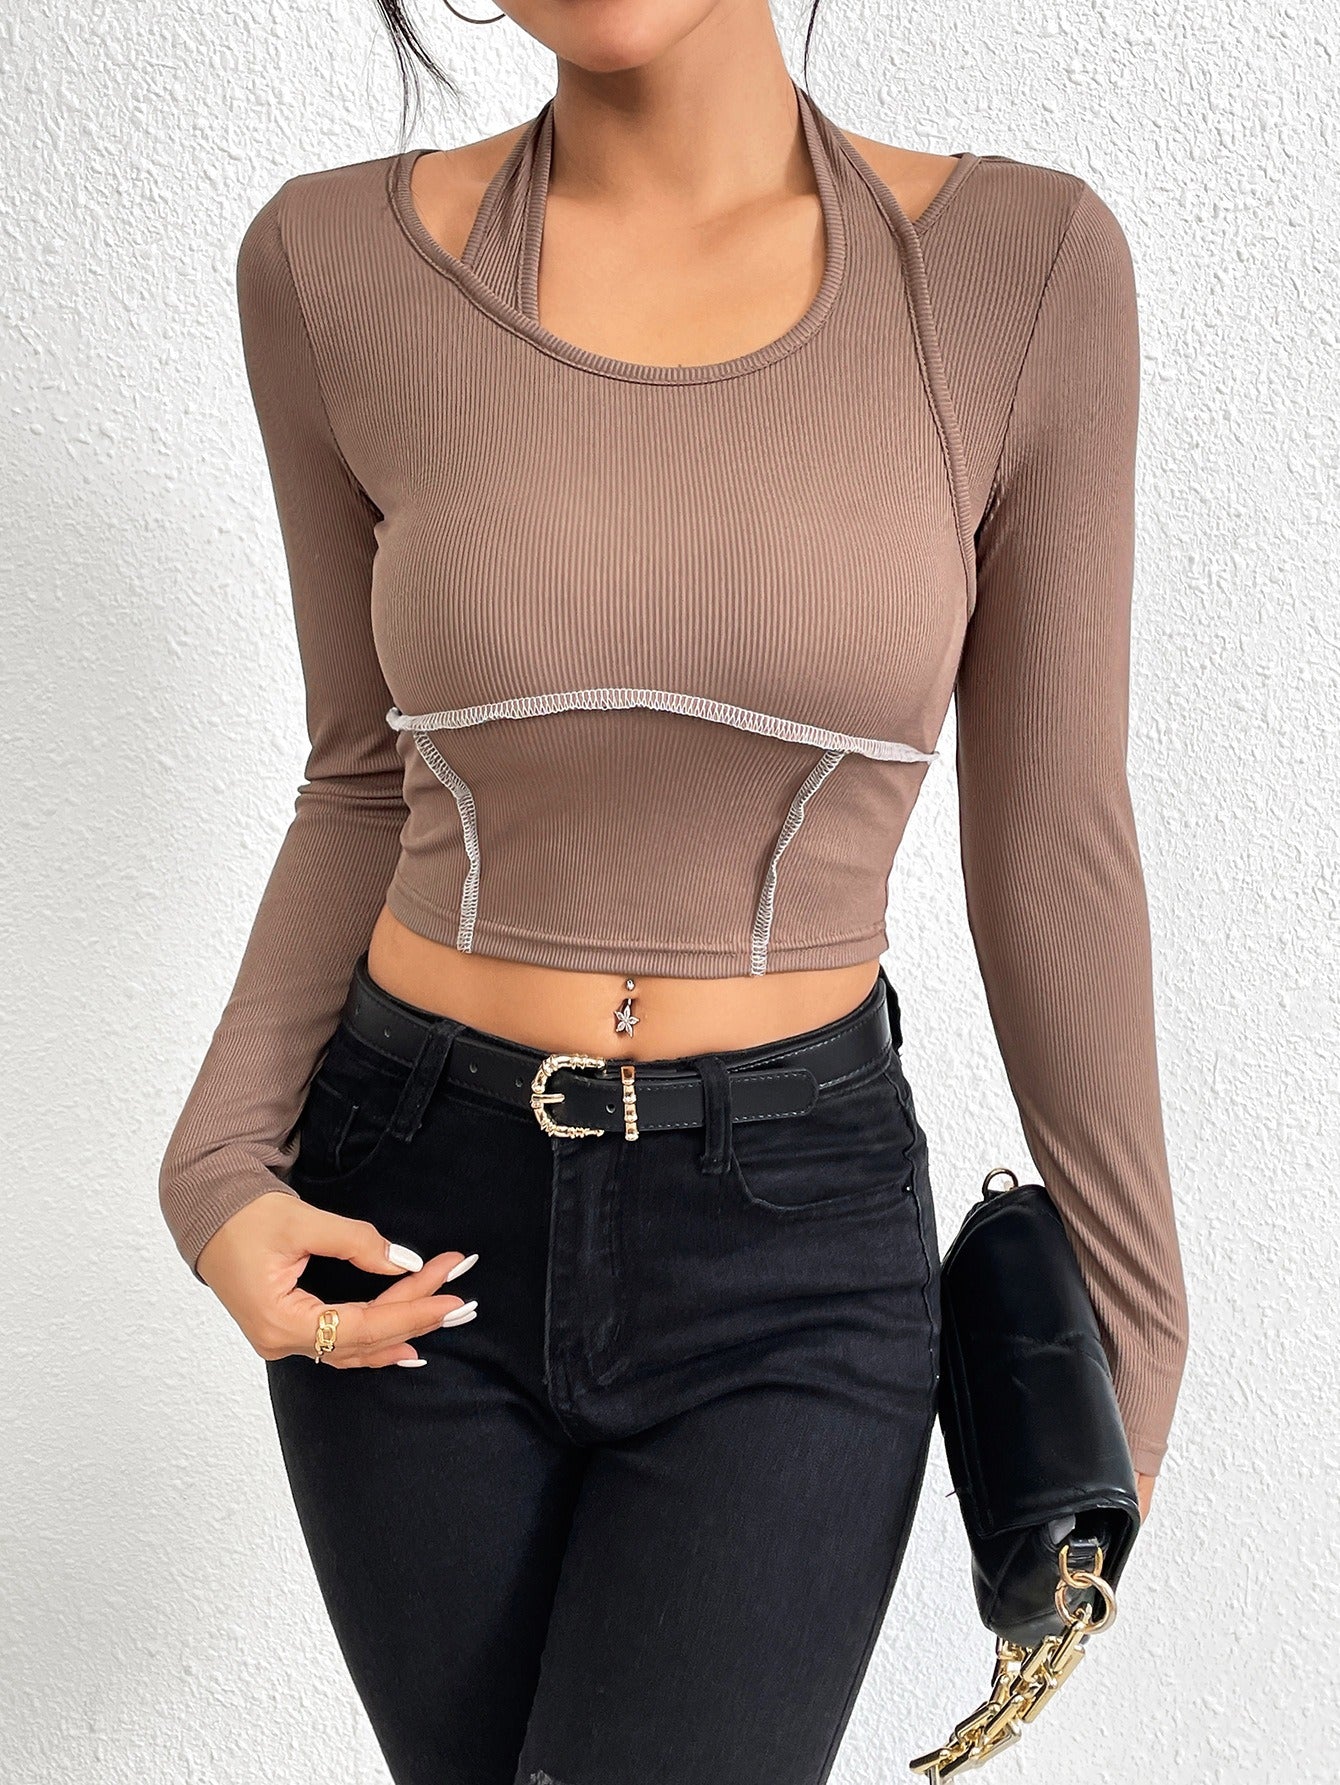 Slim fit knitted long sleeved sewing thread exposed hanging neck T-shirt fashion top